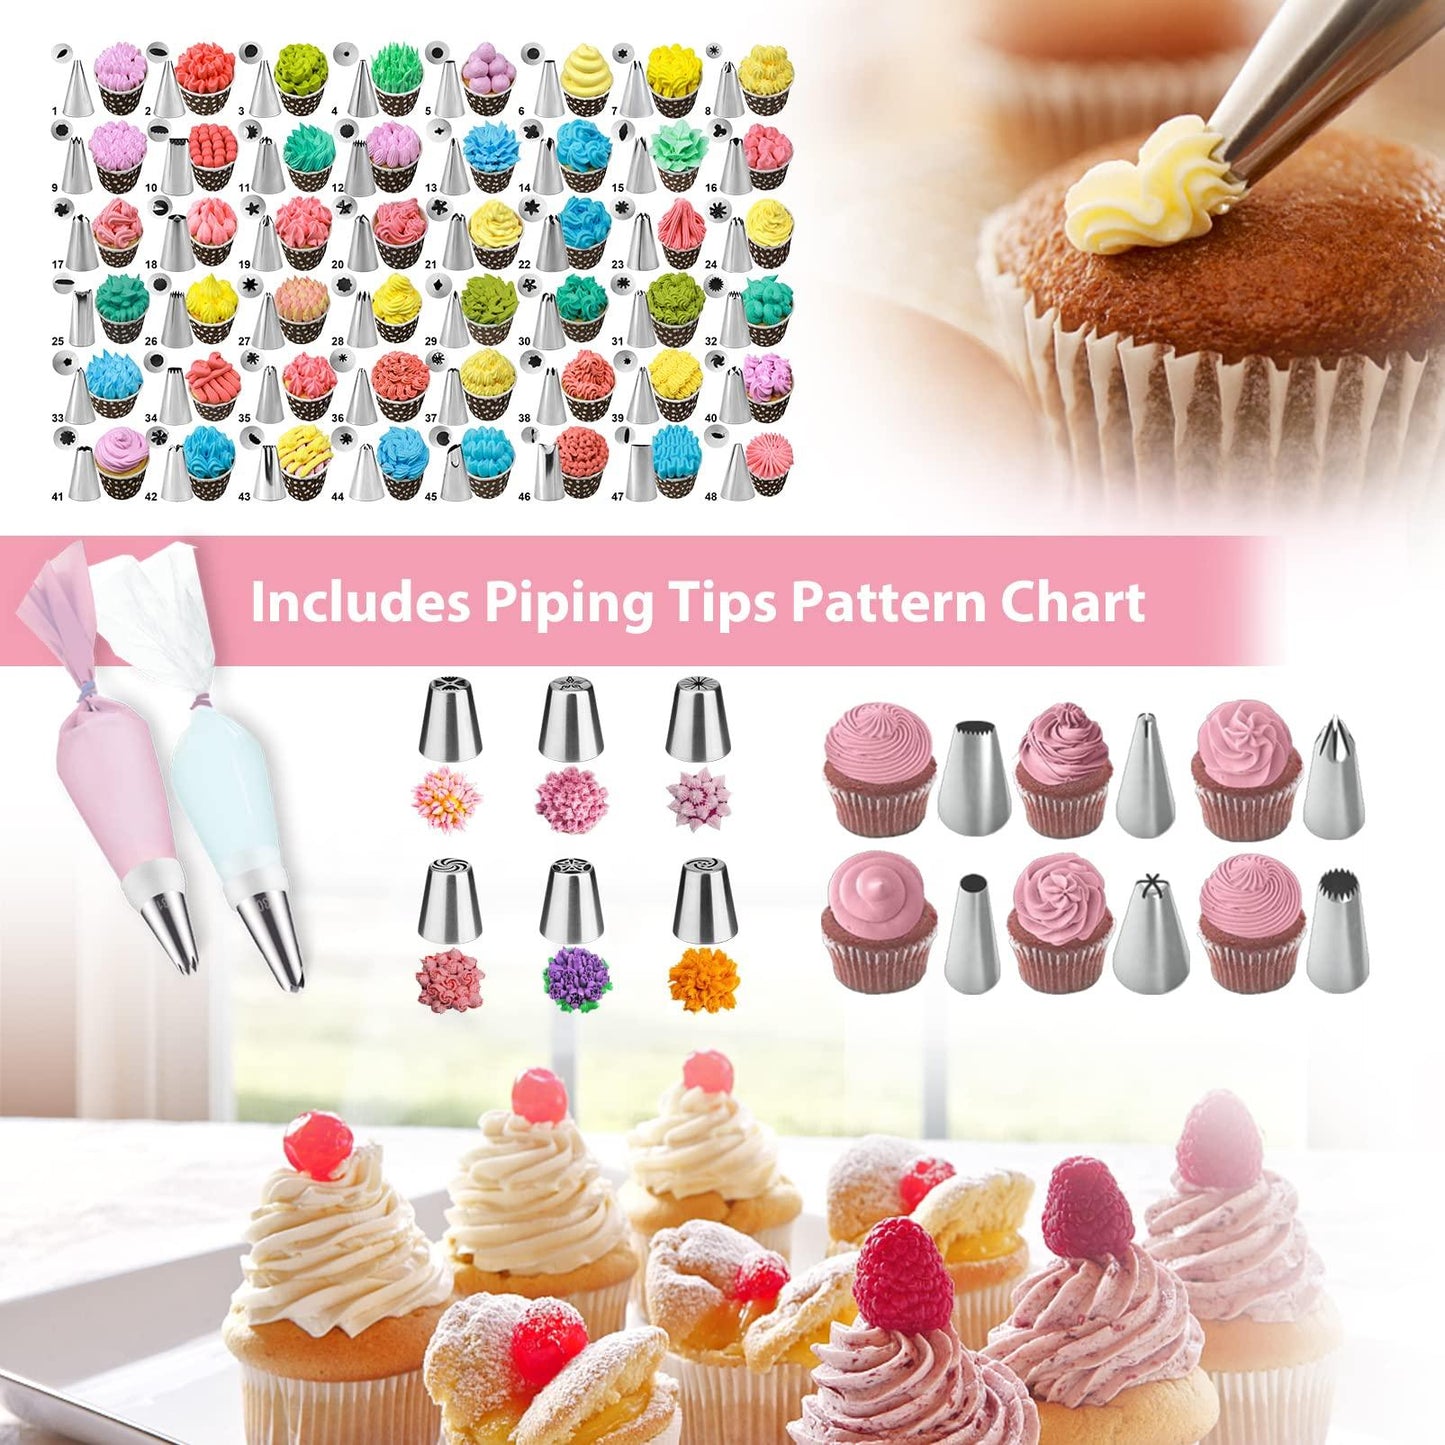 Cake Decorating Supplies Tools Kit: 358pcs Baking Accessories with Storage Case - Piping Bags and Icing Tips Set - Cupcake Cookie Frosting Fondant Bakery Set for Adults Beginners or Professional/Pink - CookCave